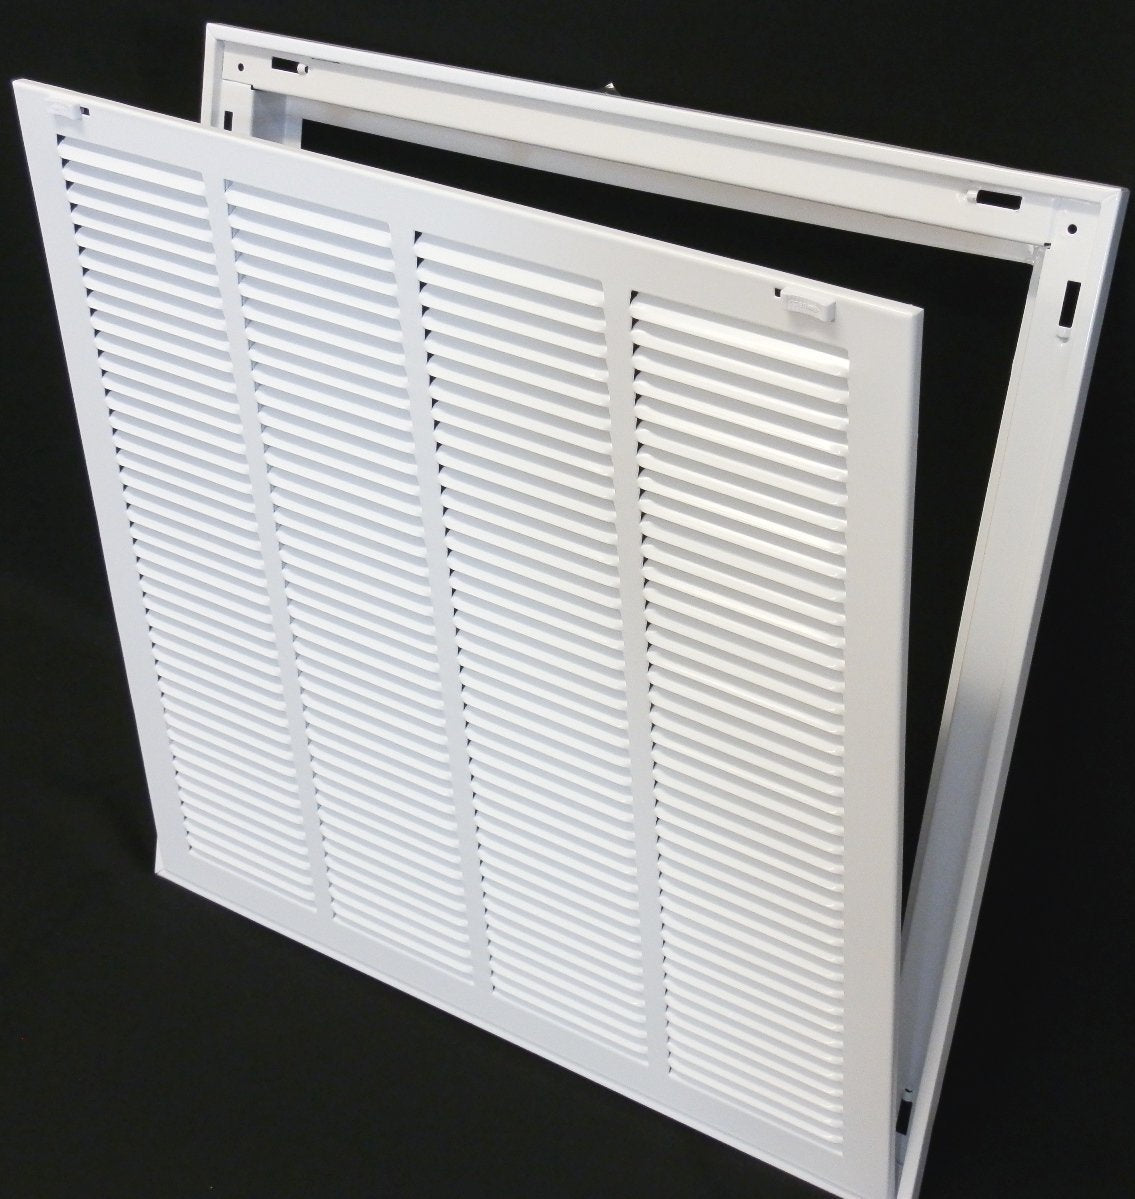 24&quot; X 22&quot; Steel Return Air Filter Grille for 1&quot; Filter - Removable Frame - [Outer Dimensions: 26 5/8&quot; X 24 5/8&quot;]